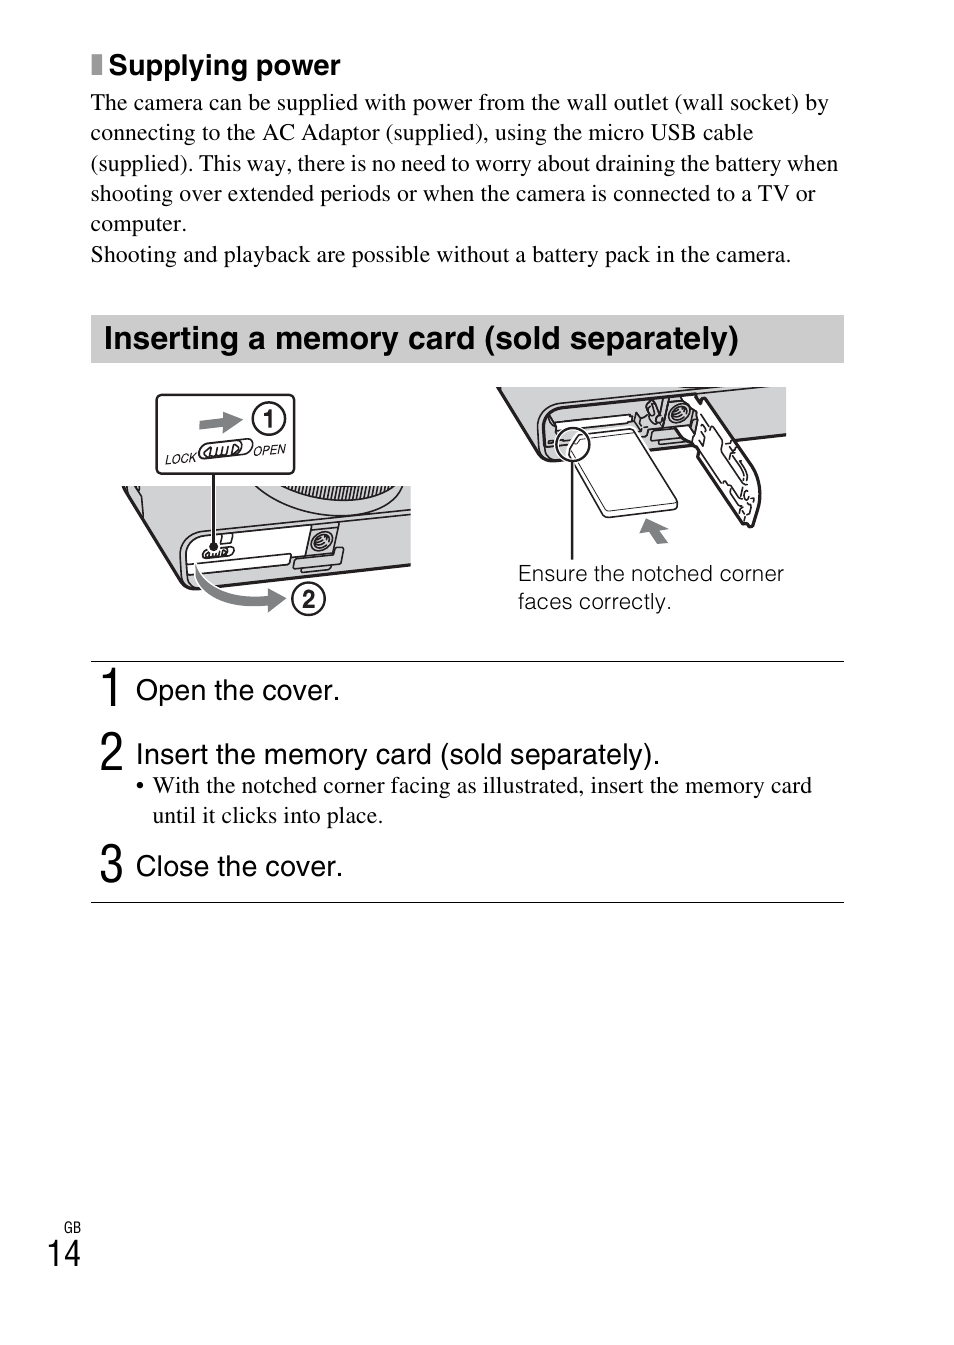 Inserting a memory card (sold separately) | Sony DSC-RX100 User Manual | Page 14 / 68